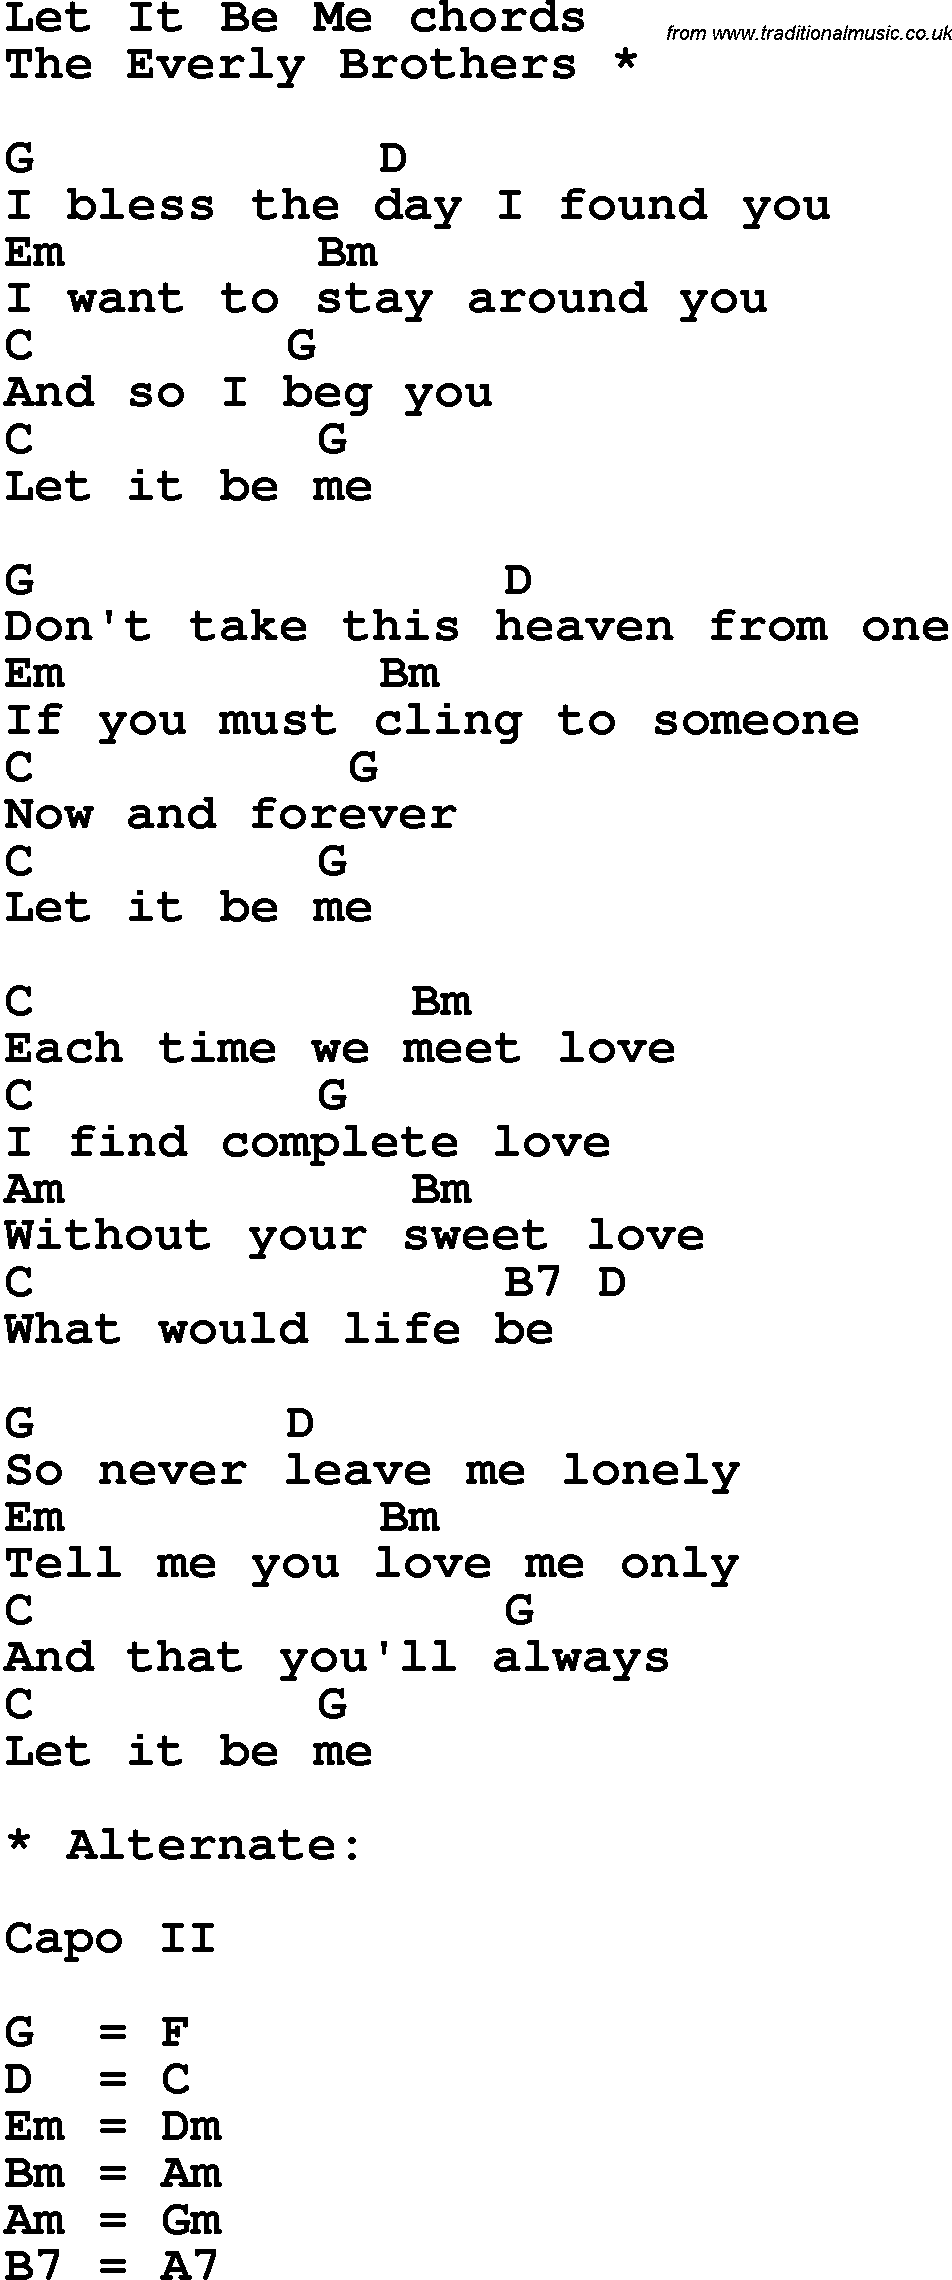 Song Lyrics with guitar chords for Let It Be Me